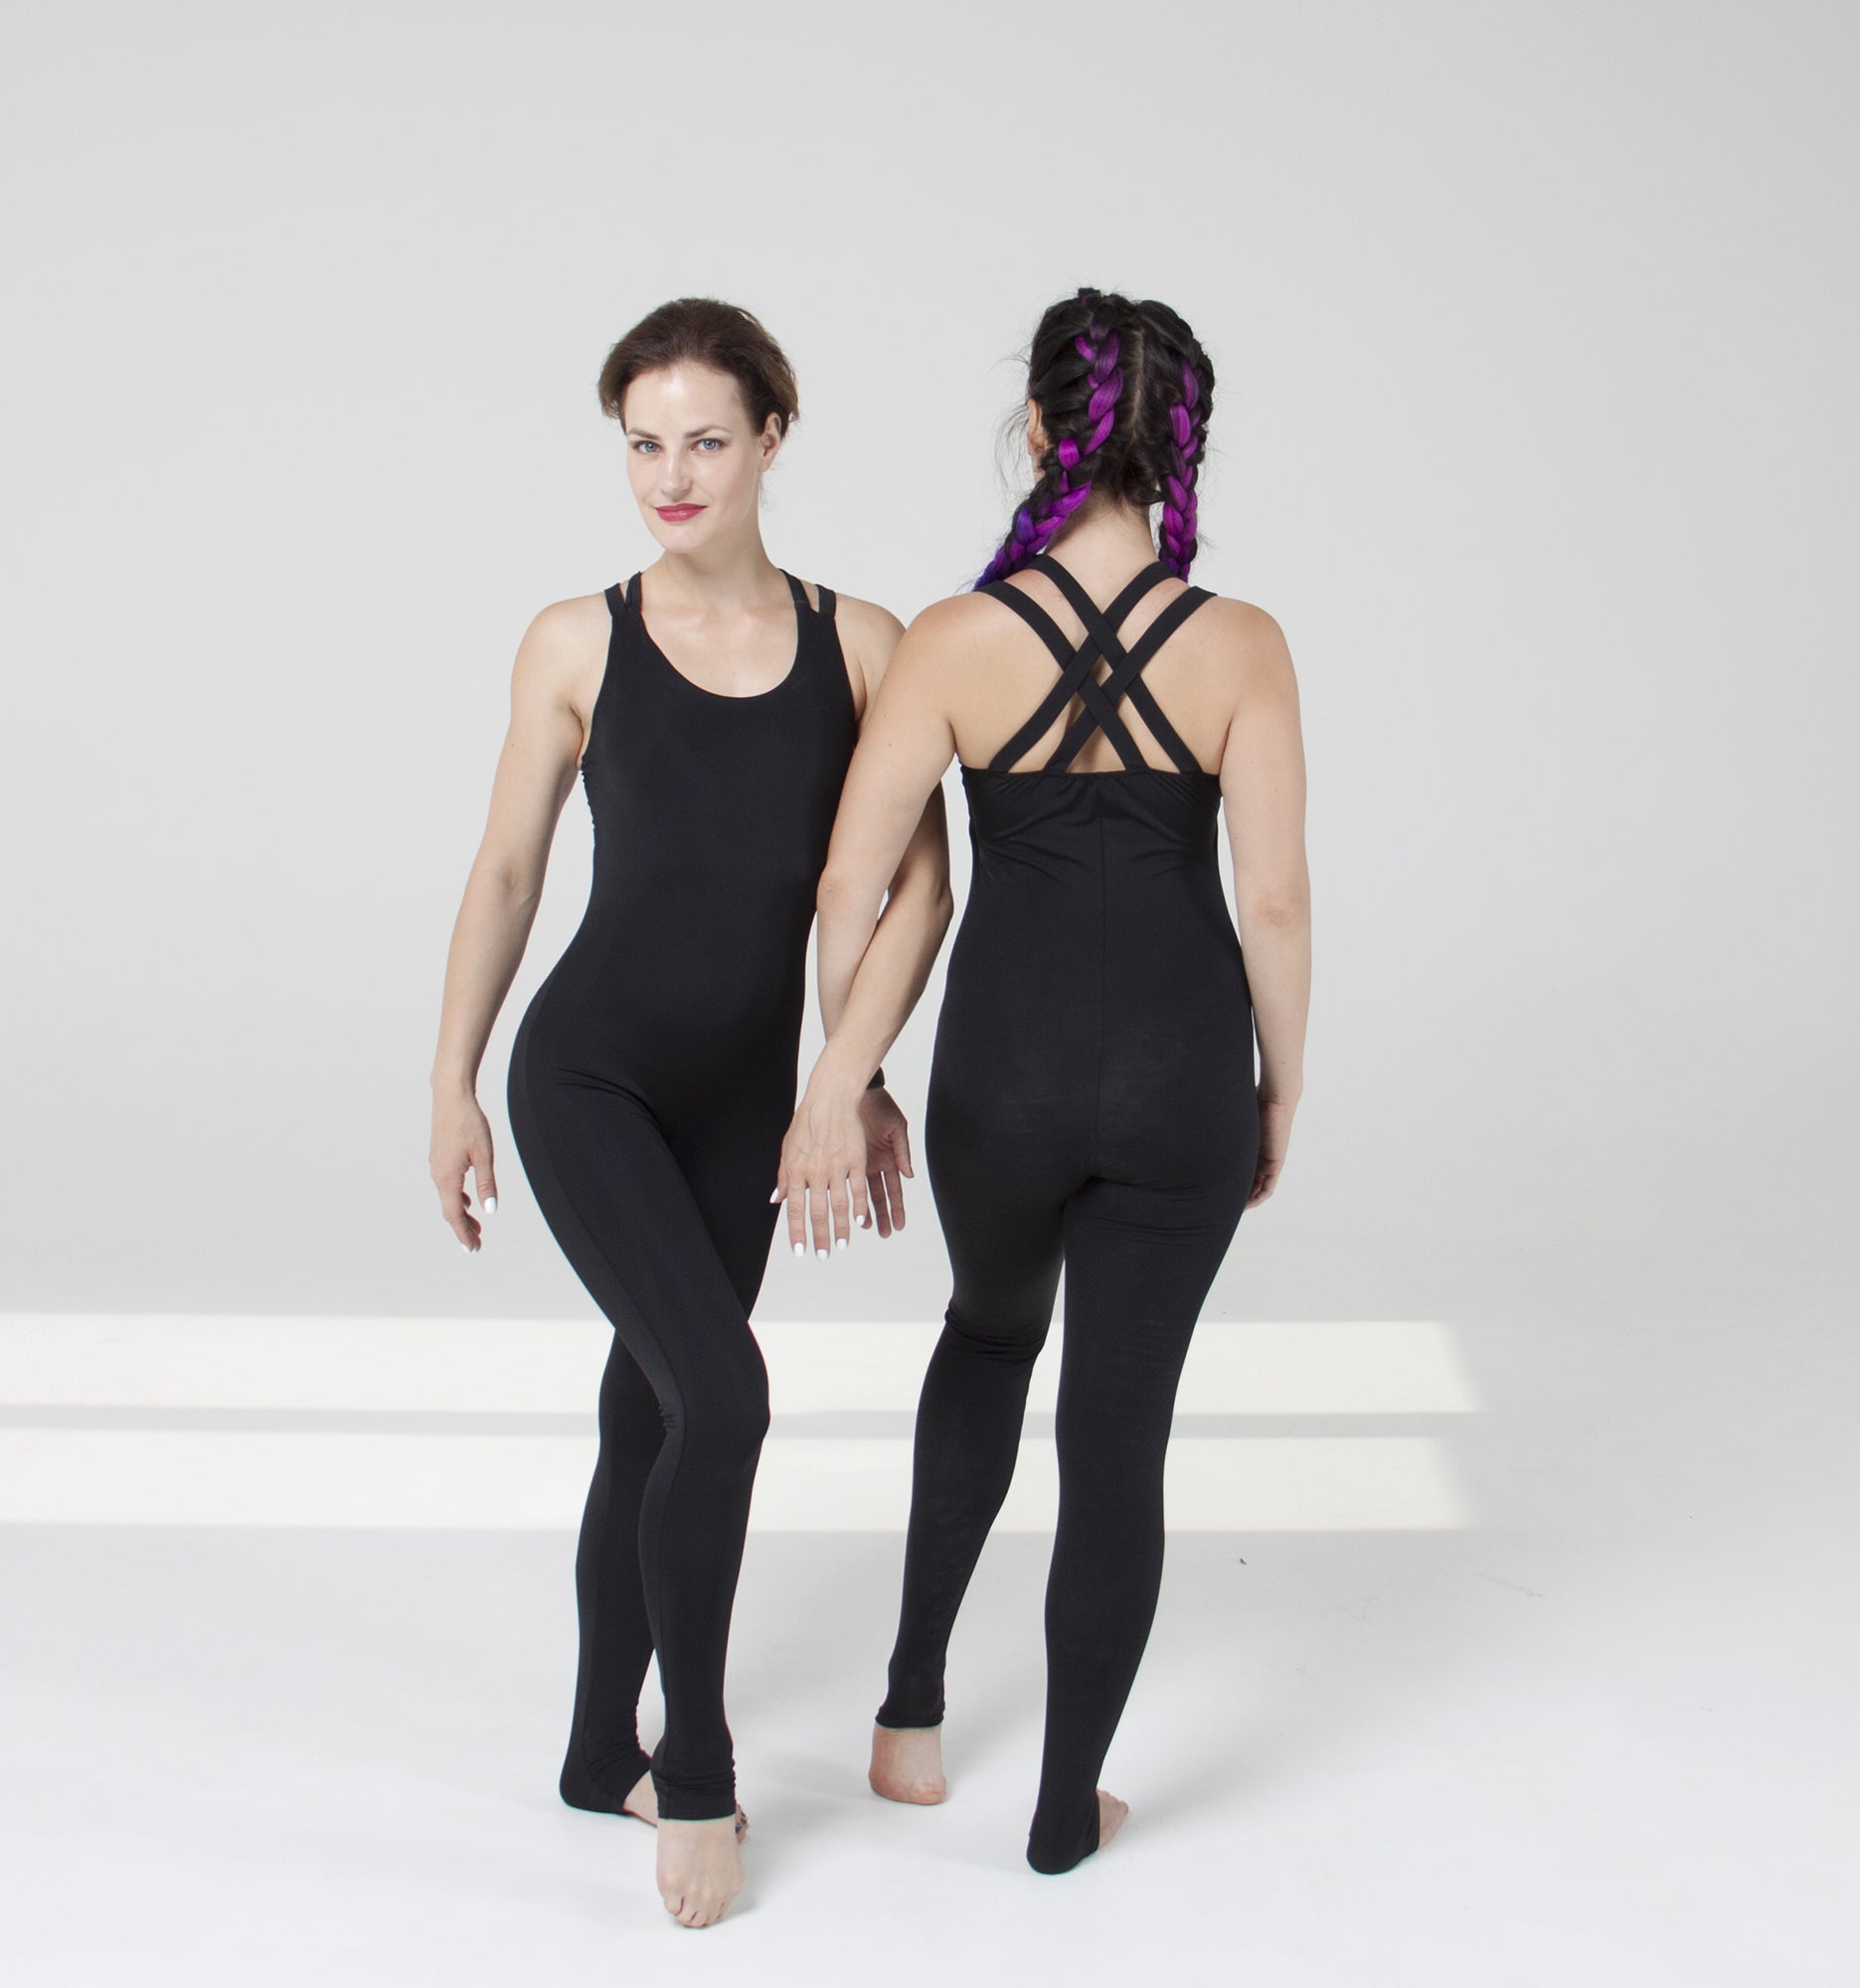 CircusPro Aerial bodysuit yoga and gym sleeveless costume soft and stretchy fabric